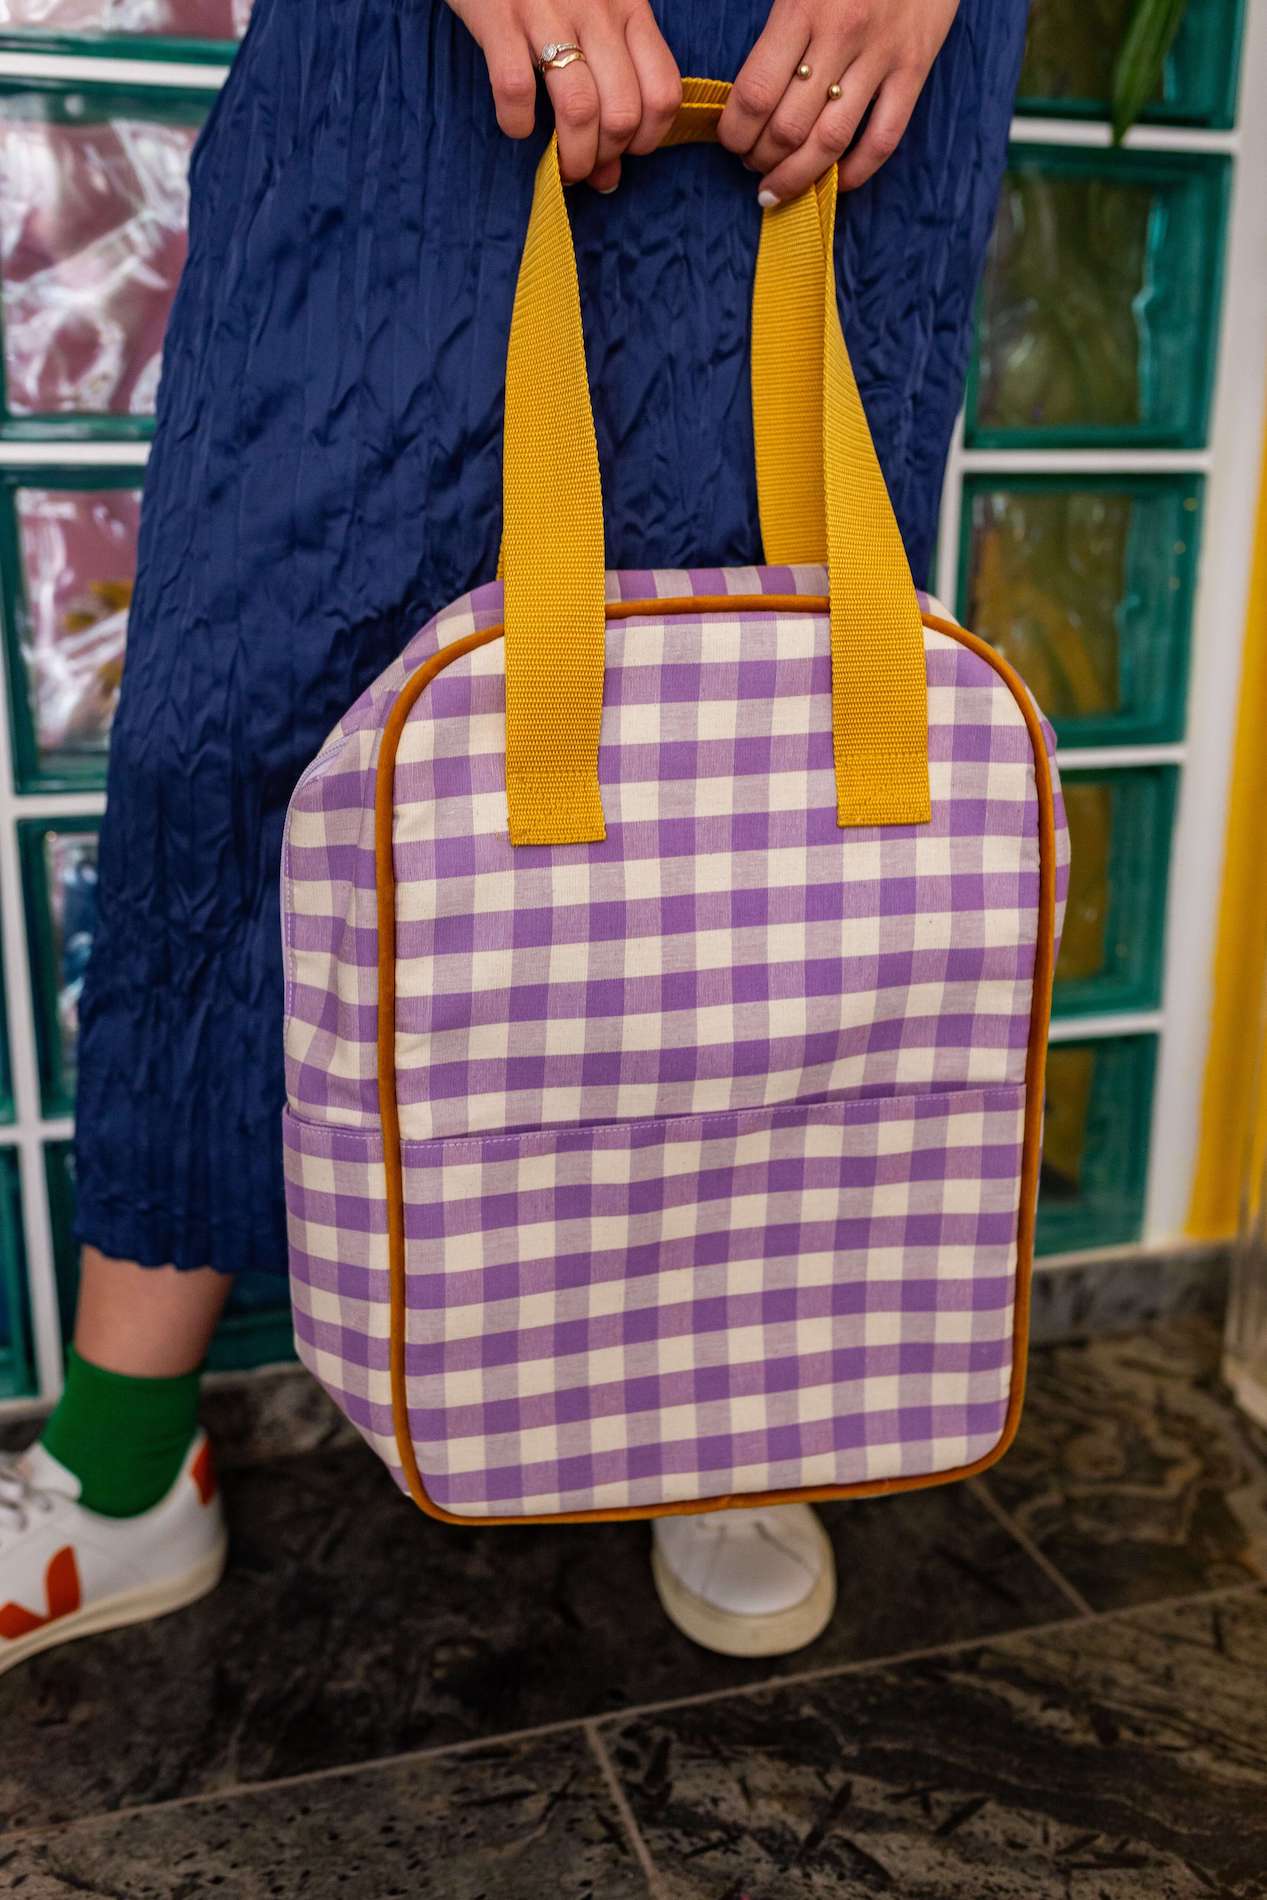 lilac gingham backpack by bettys home held by woman in jeans skirt